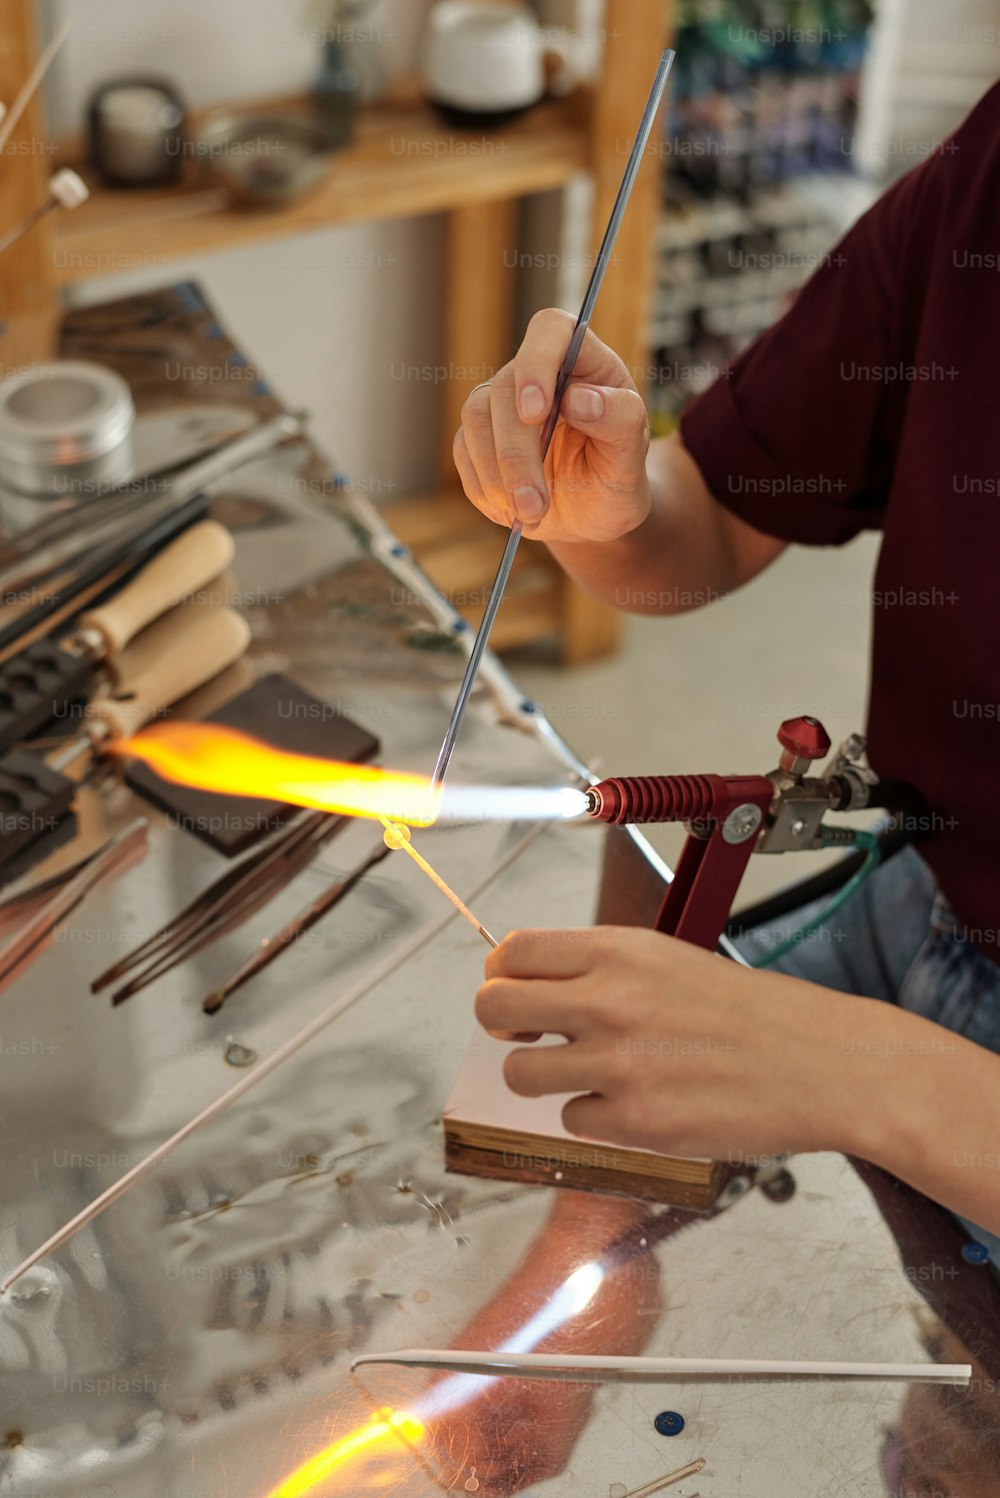 Hands of contemporary female artisan sitting by workplace and burning stick shaped workpiece with fire while holding it over burner